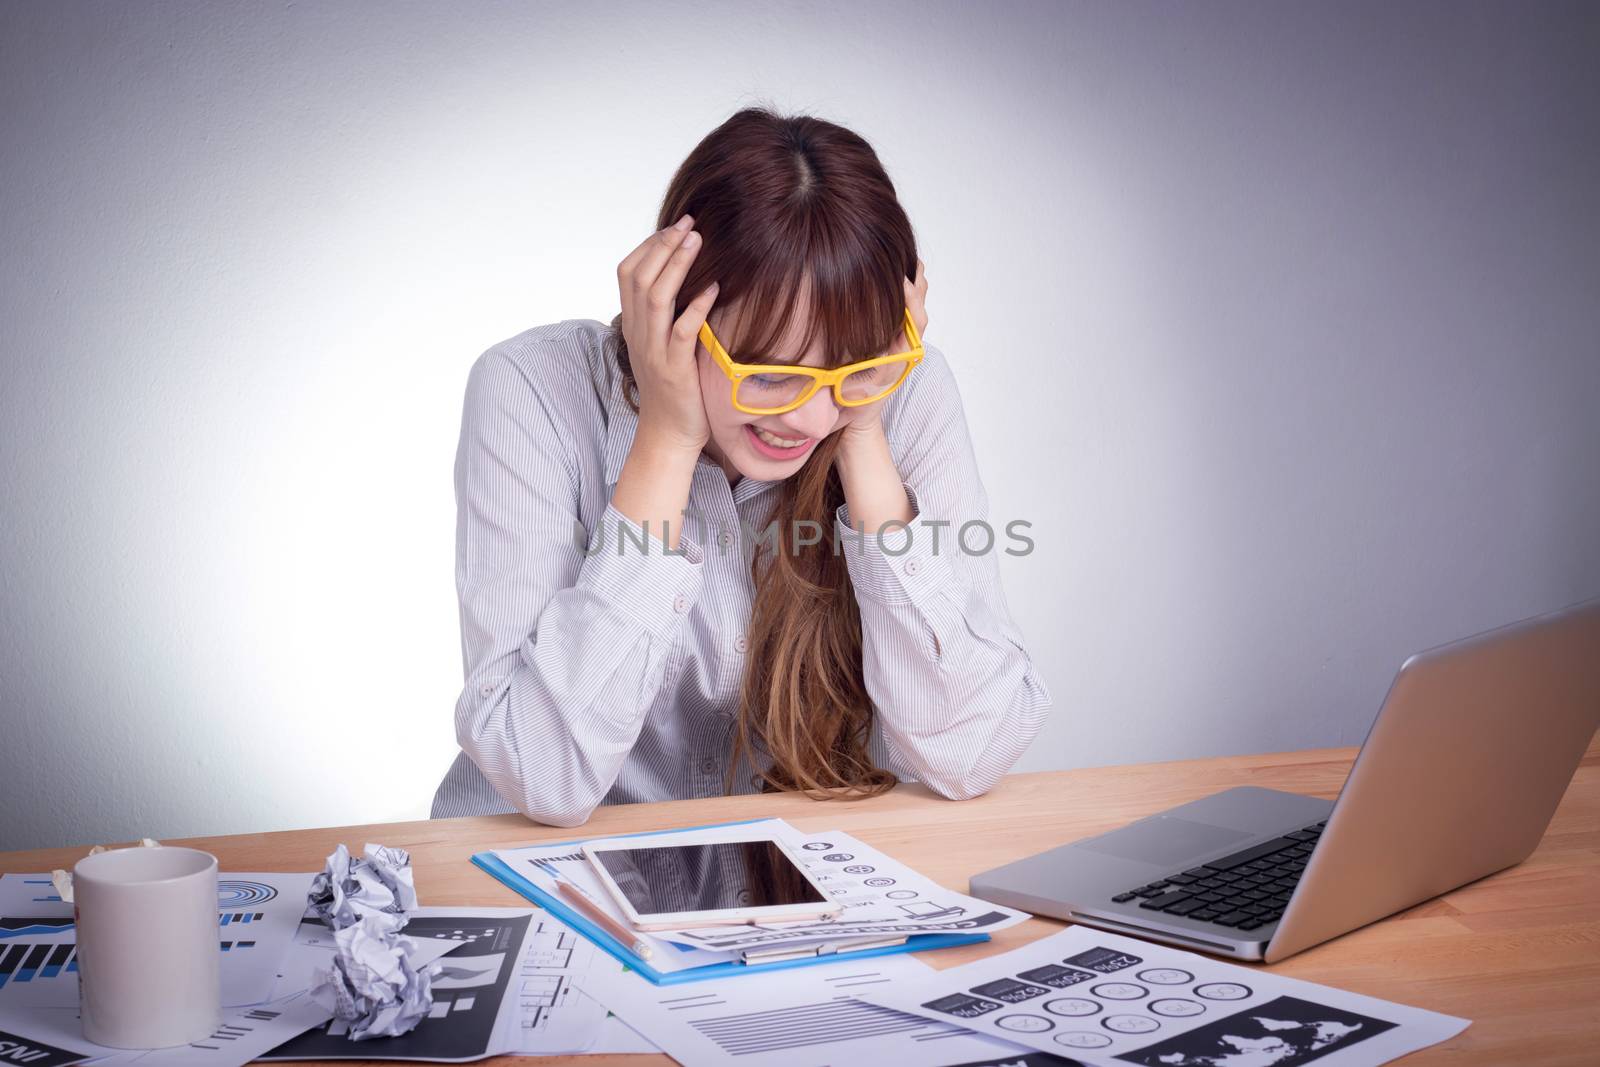 Feeling tired and stress. A stressed Asian business woman looks tired in her office by asiandelight